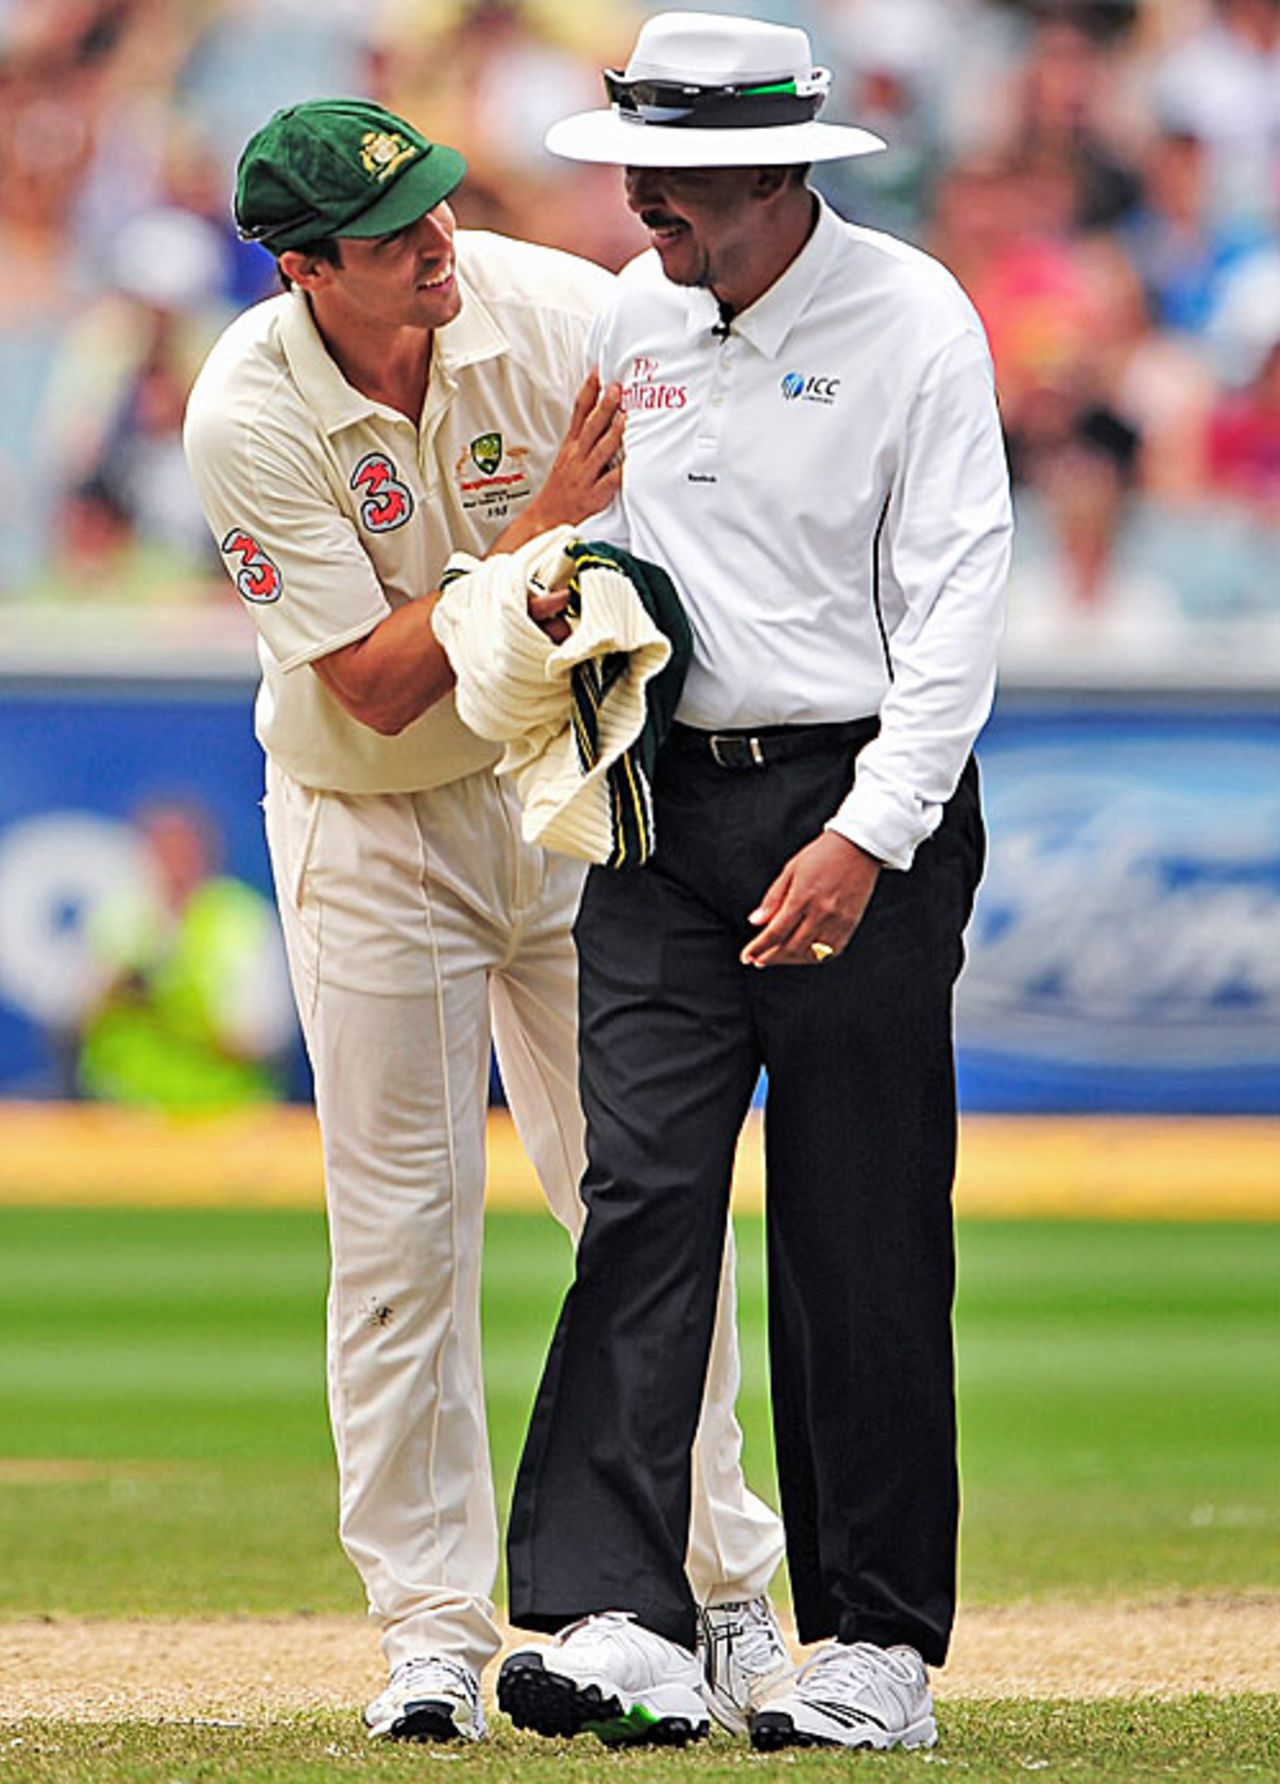 Mitchell Johnson makes peace with Billy Doctrove following a collision, Australia v Pakistan, 1st Test, Melbourne, 3rd day, December 28, 2009